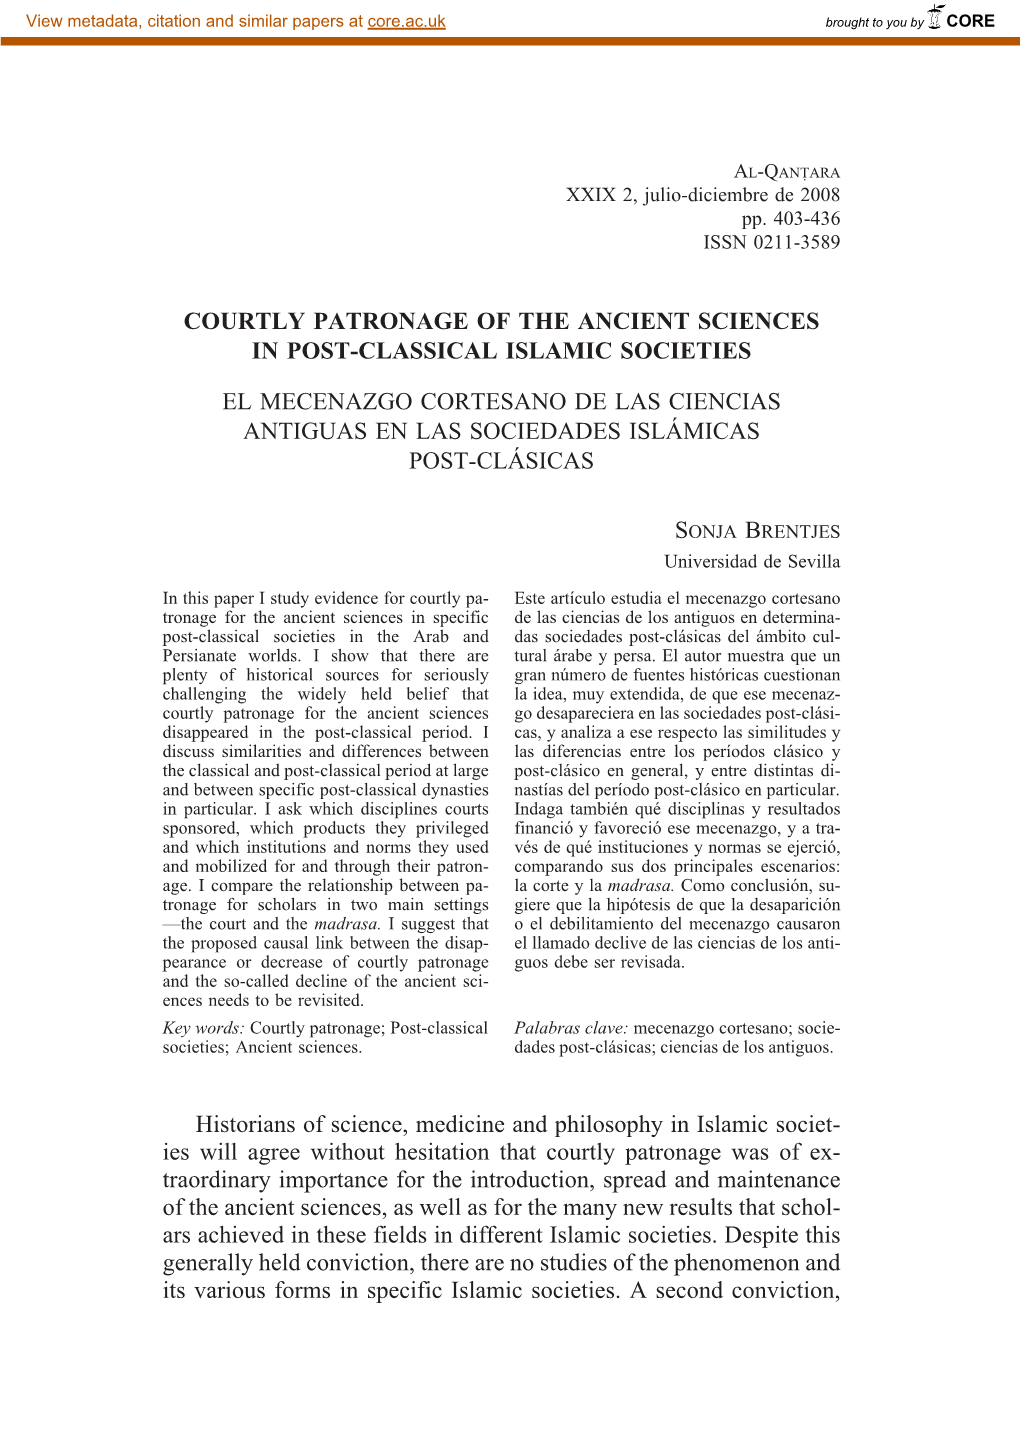 Courtly Patronage of the Ancient Sciences in Post-Classical Islamic Societies